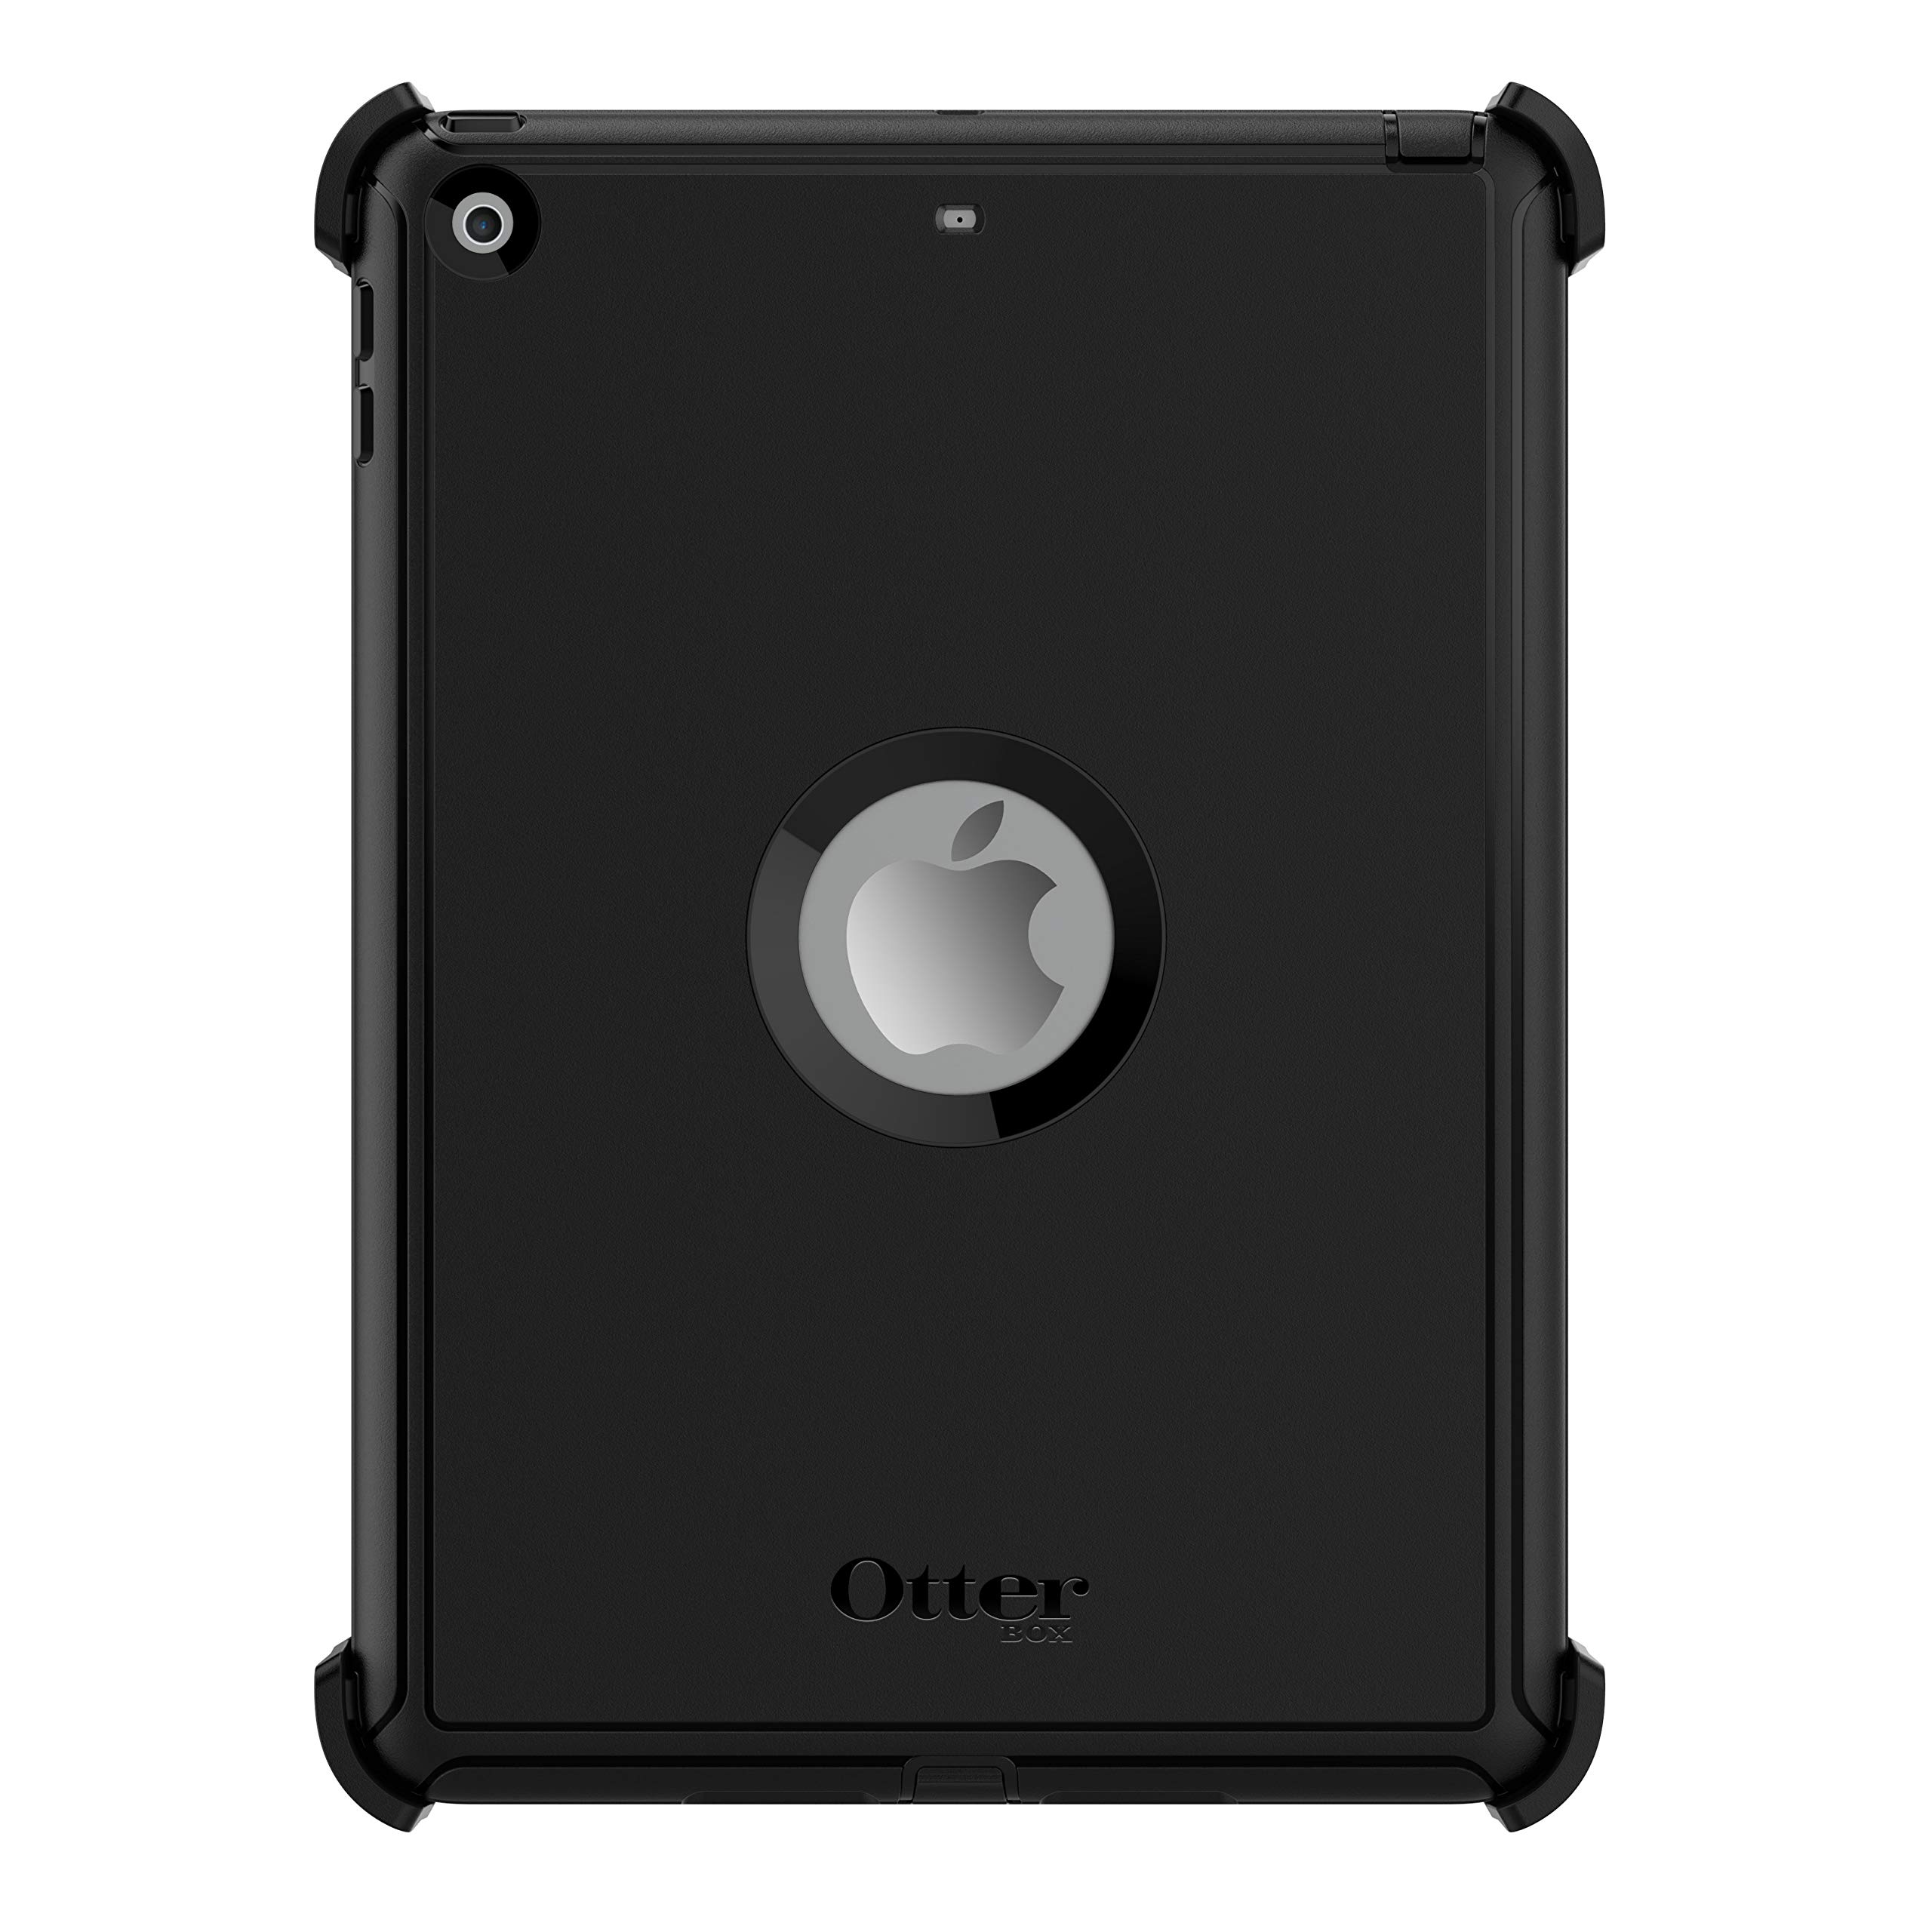 OTTERBOX DEFENDER SERIES Case for iPad 5th & 6th Gen - Non-retail/Ships in Polybag - BLACK